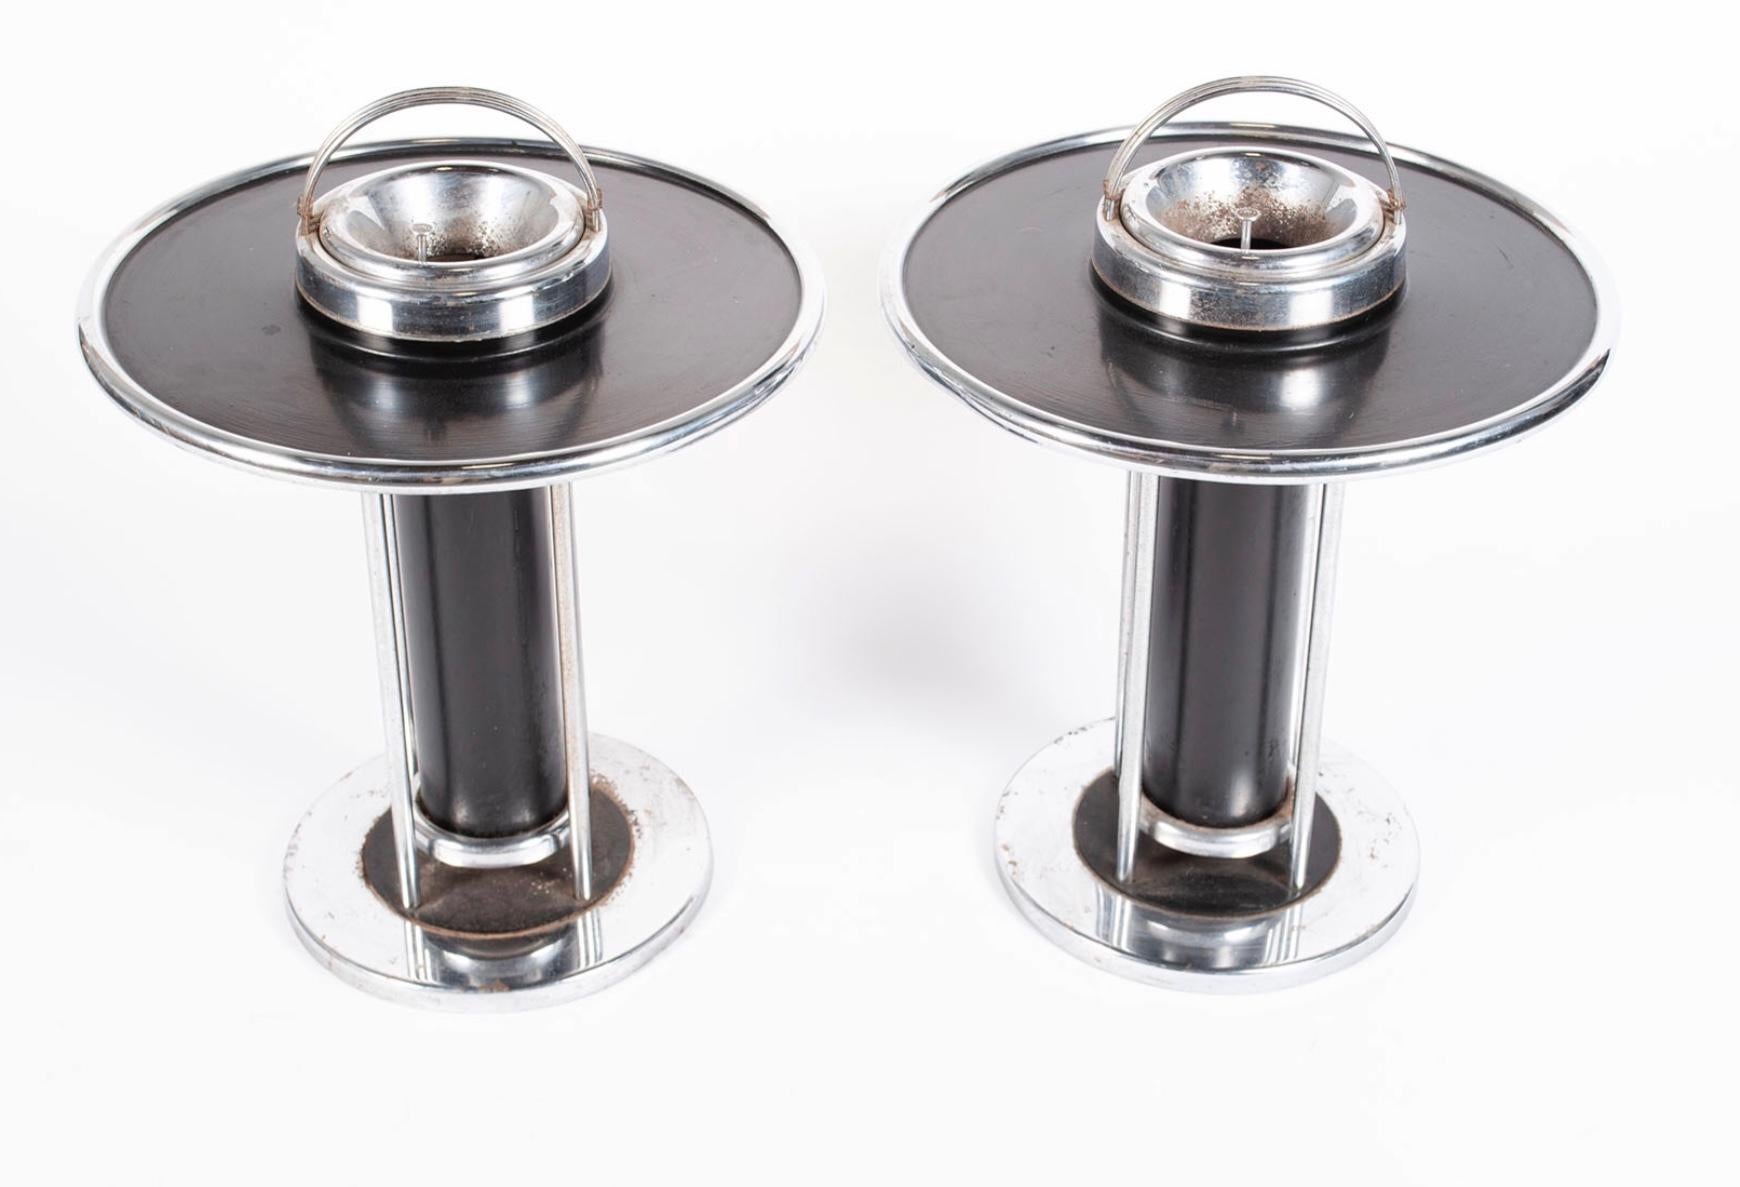 Wolfgang Hoffman 1934 Art Deco smoking stands for Howell. Chrome-plated steel. Rounded handle, chrome hinged receptacle, black lacquered table surface ab one cylindrical standard and terminating in round chrome base. Howell Exclusive design label to